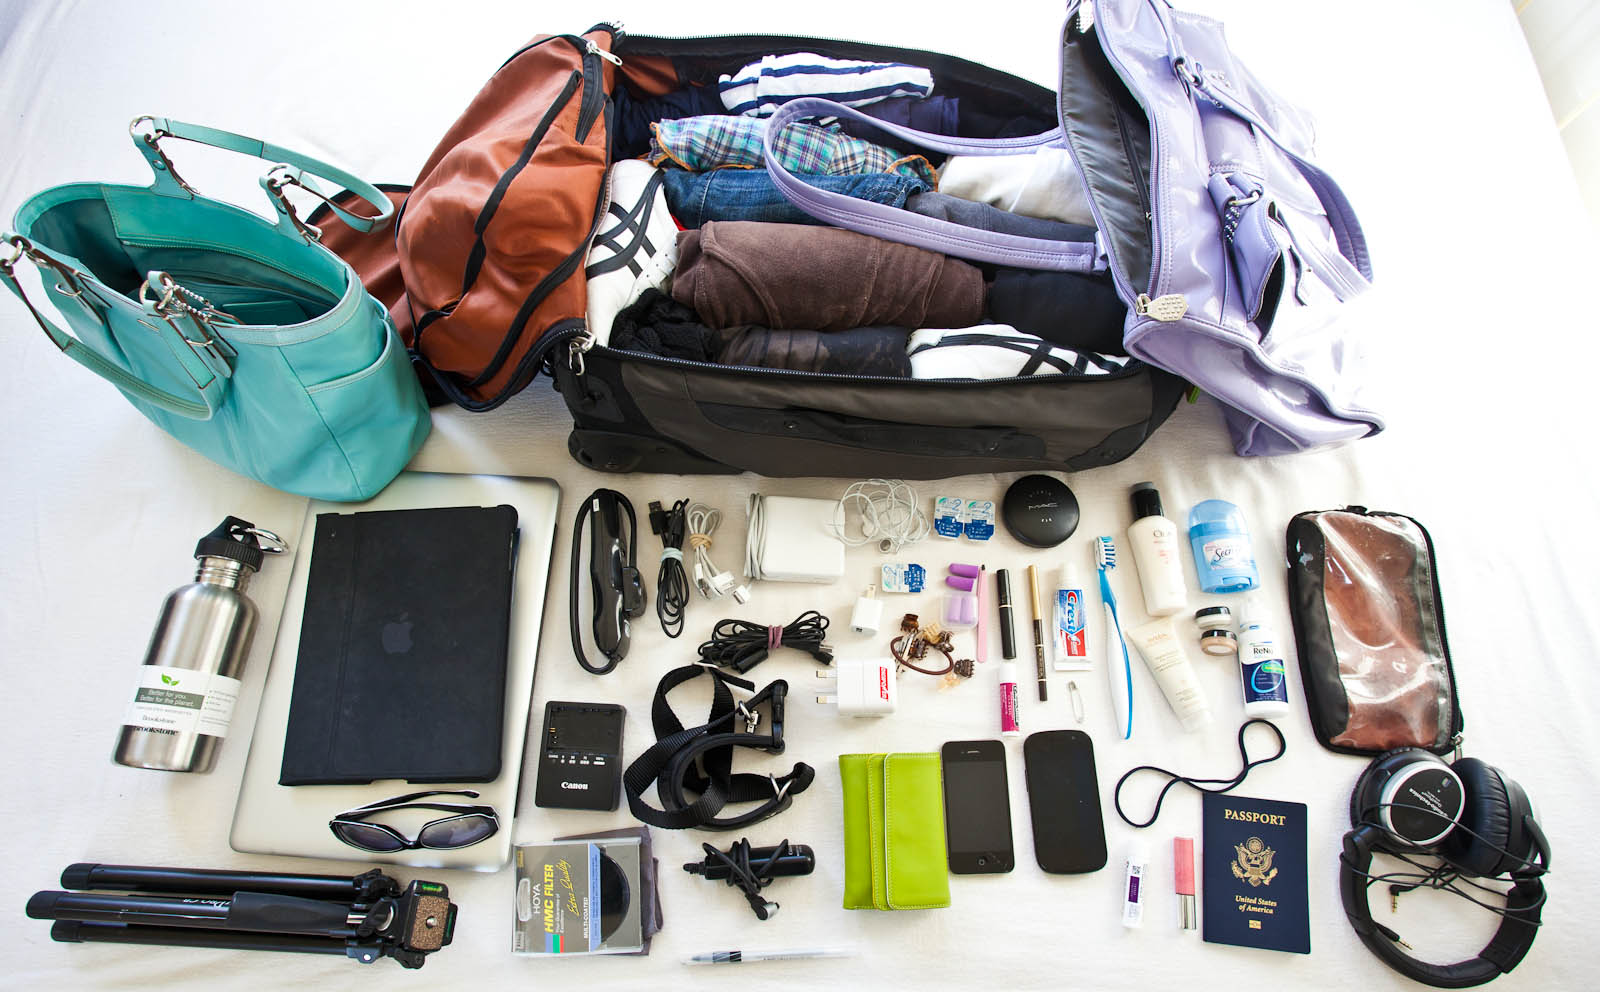 Image Representing Packing for travel